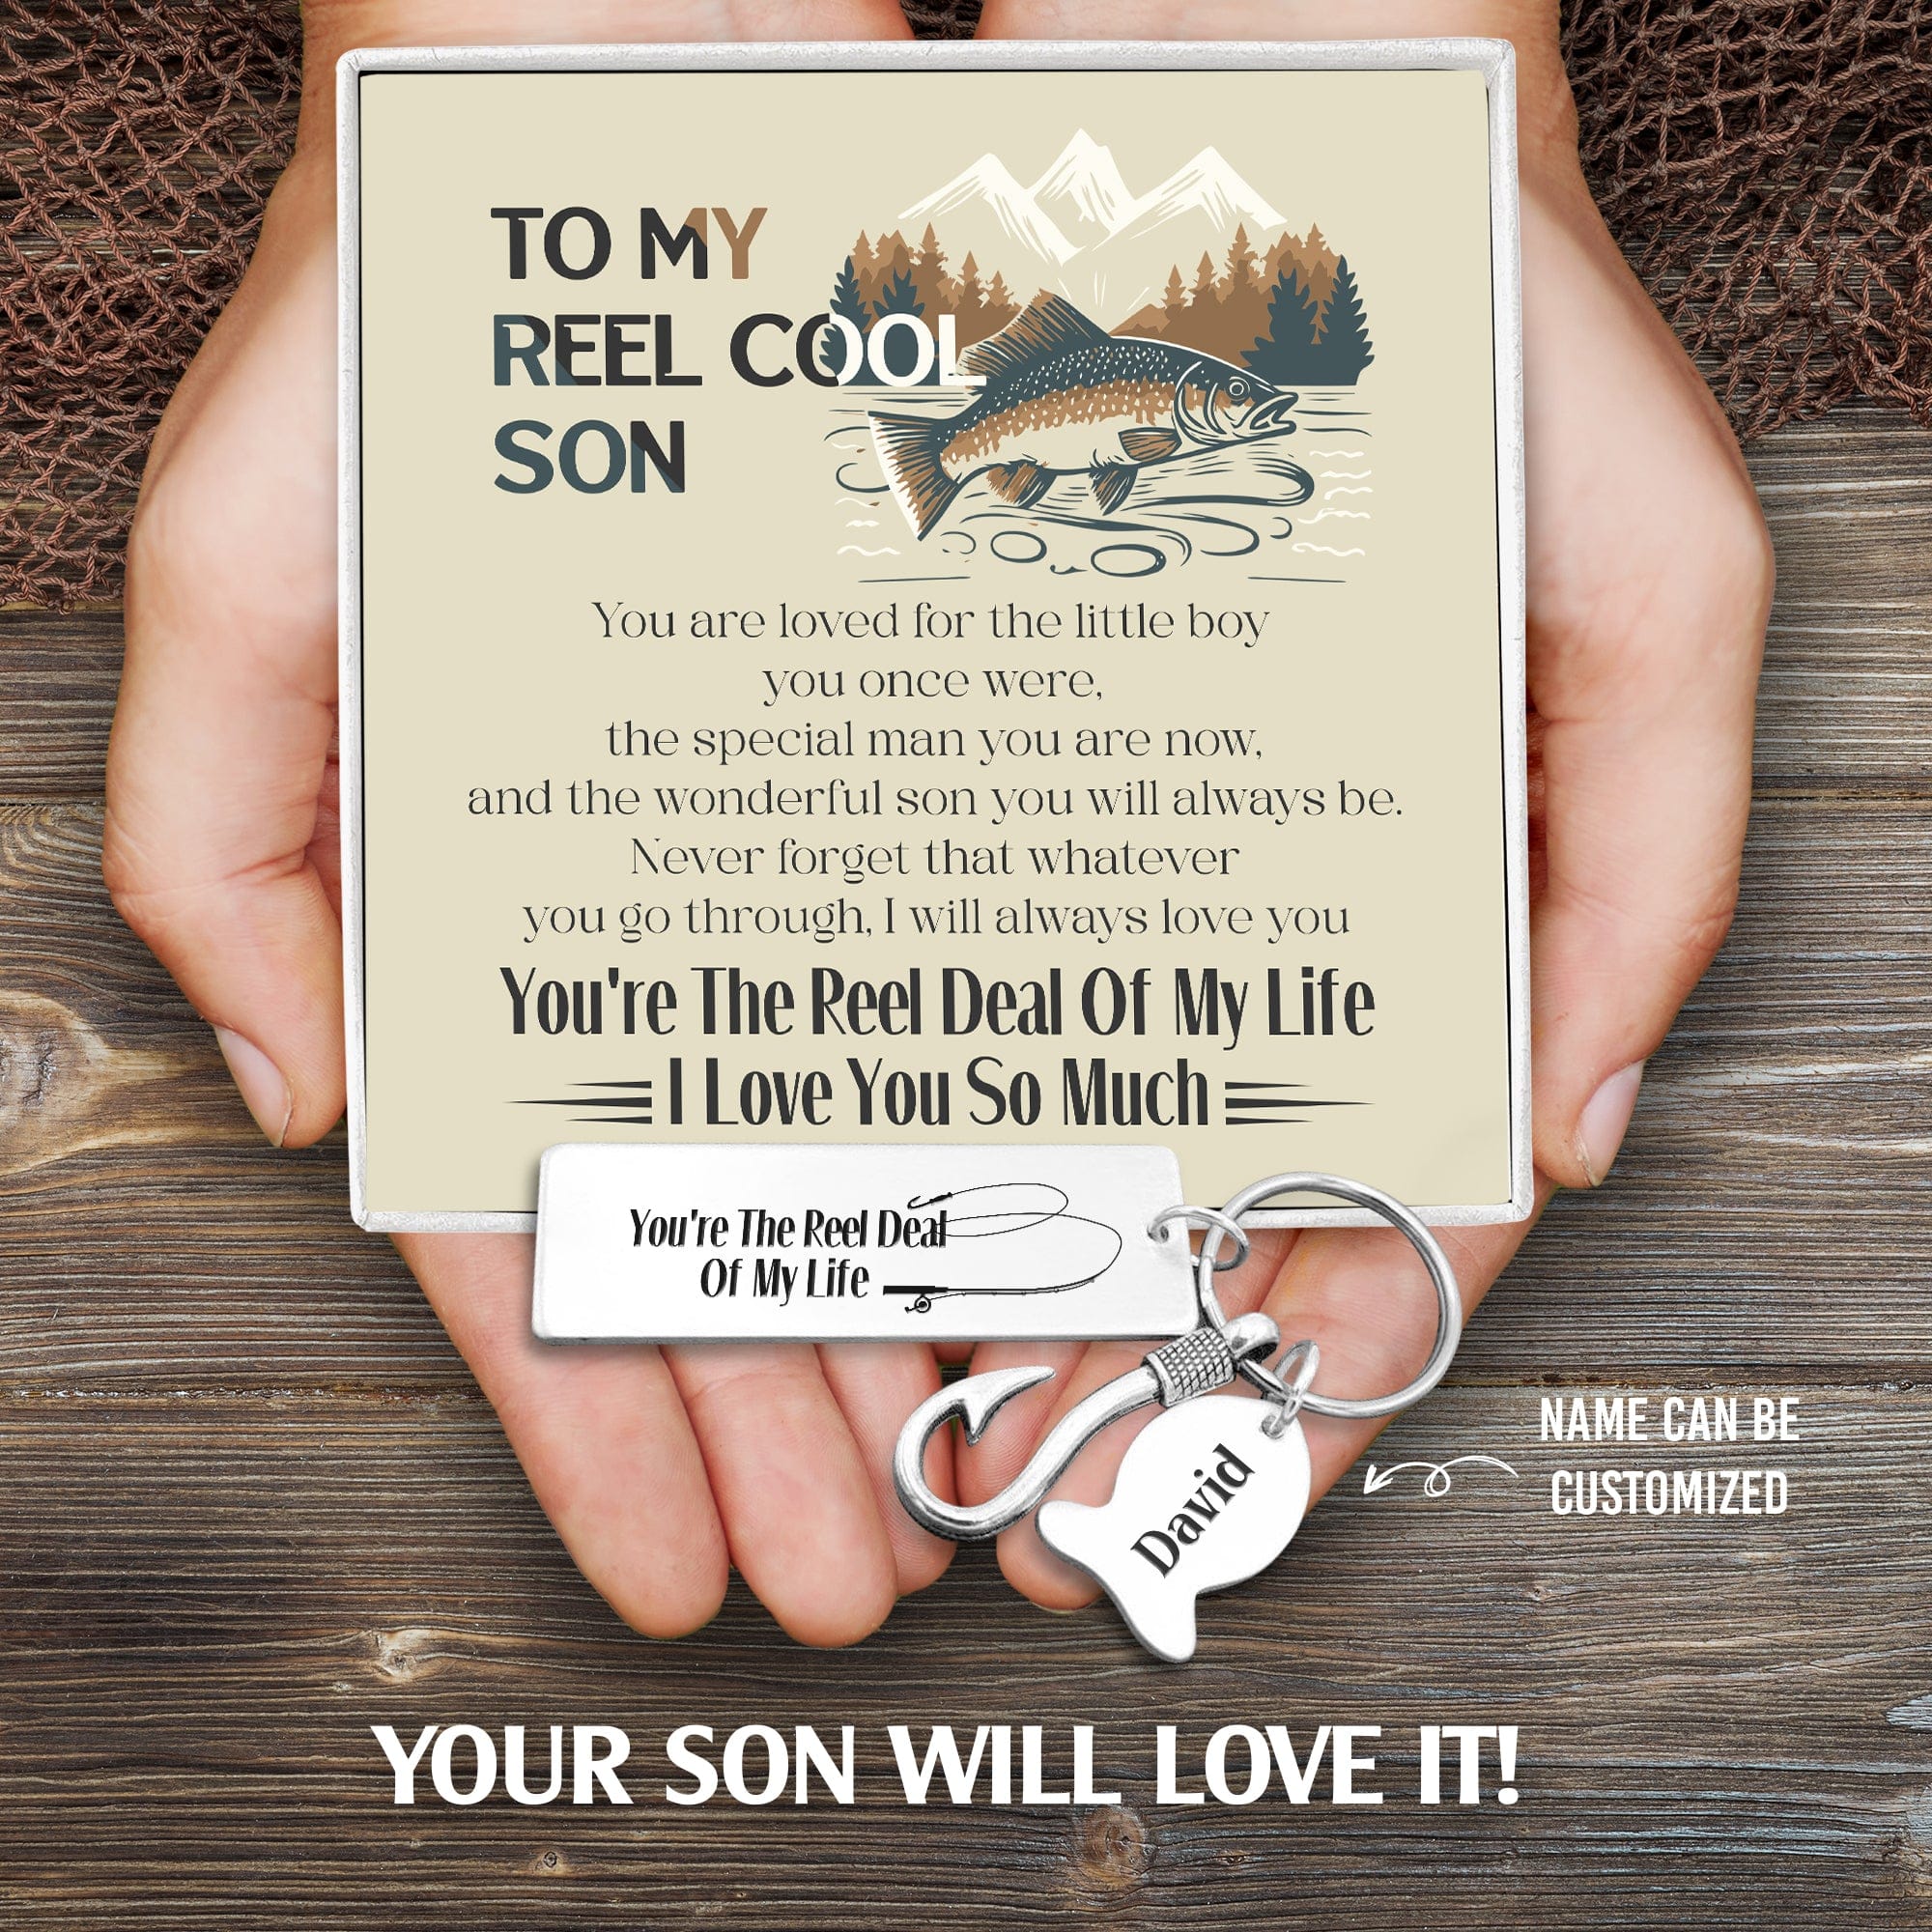 Personalized Fishing Hook Keychain - Fishing - To My Son - I Love You So Much - Gku16008